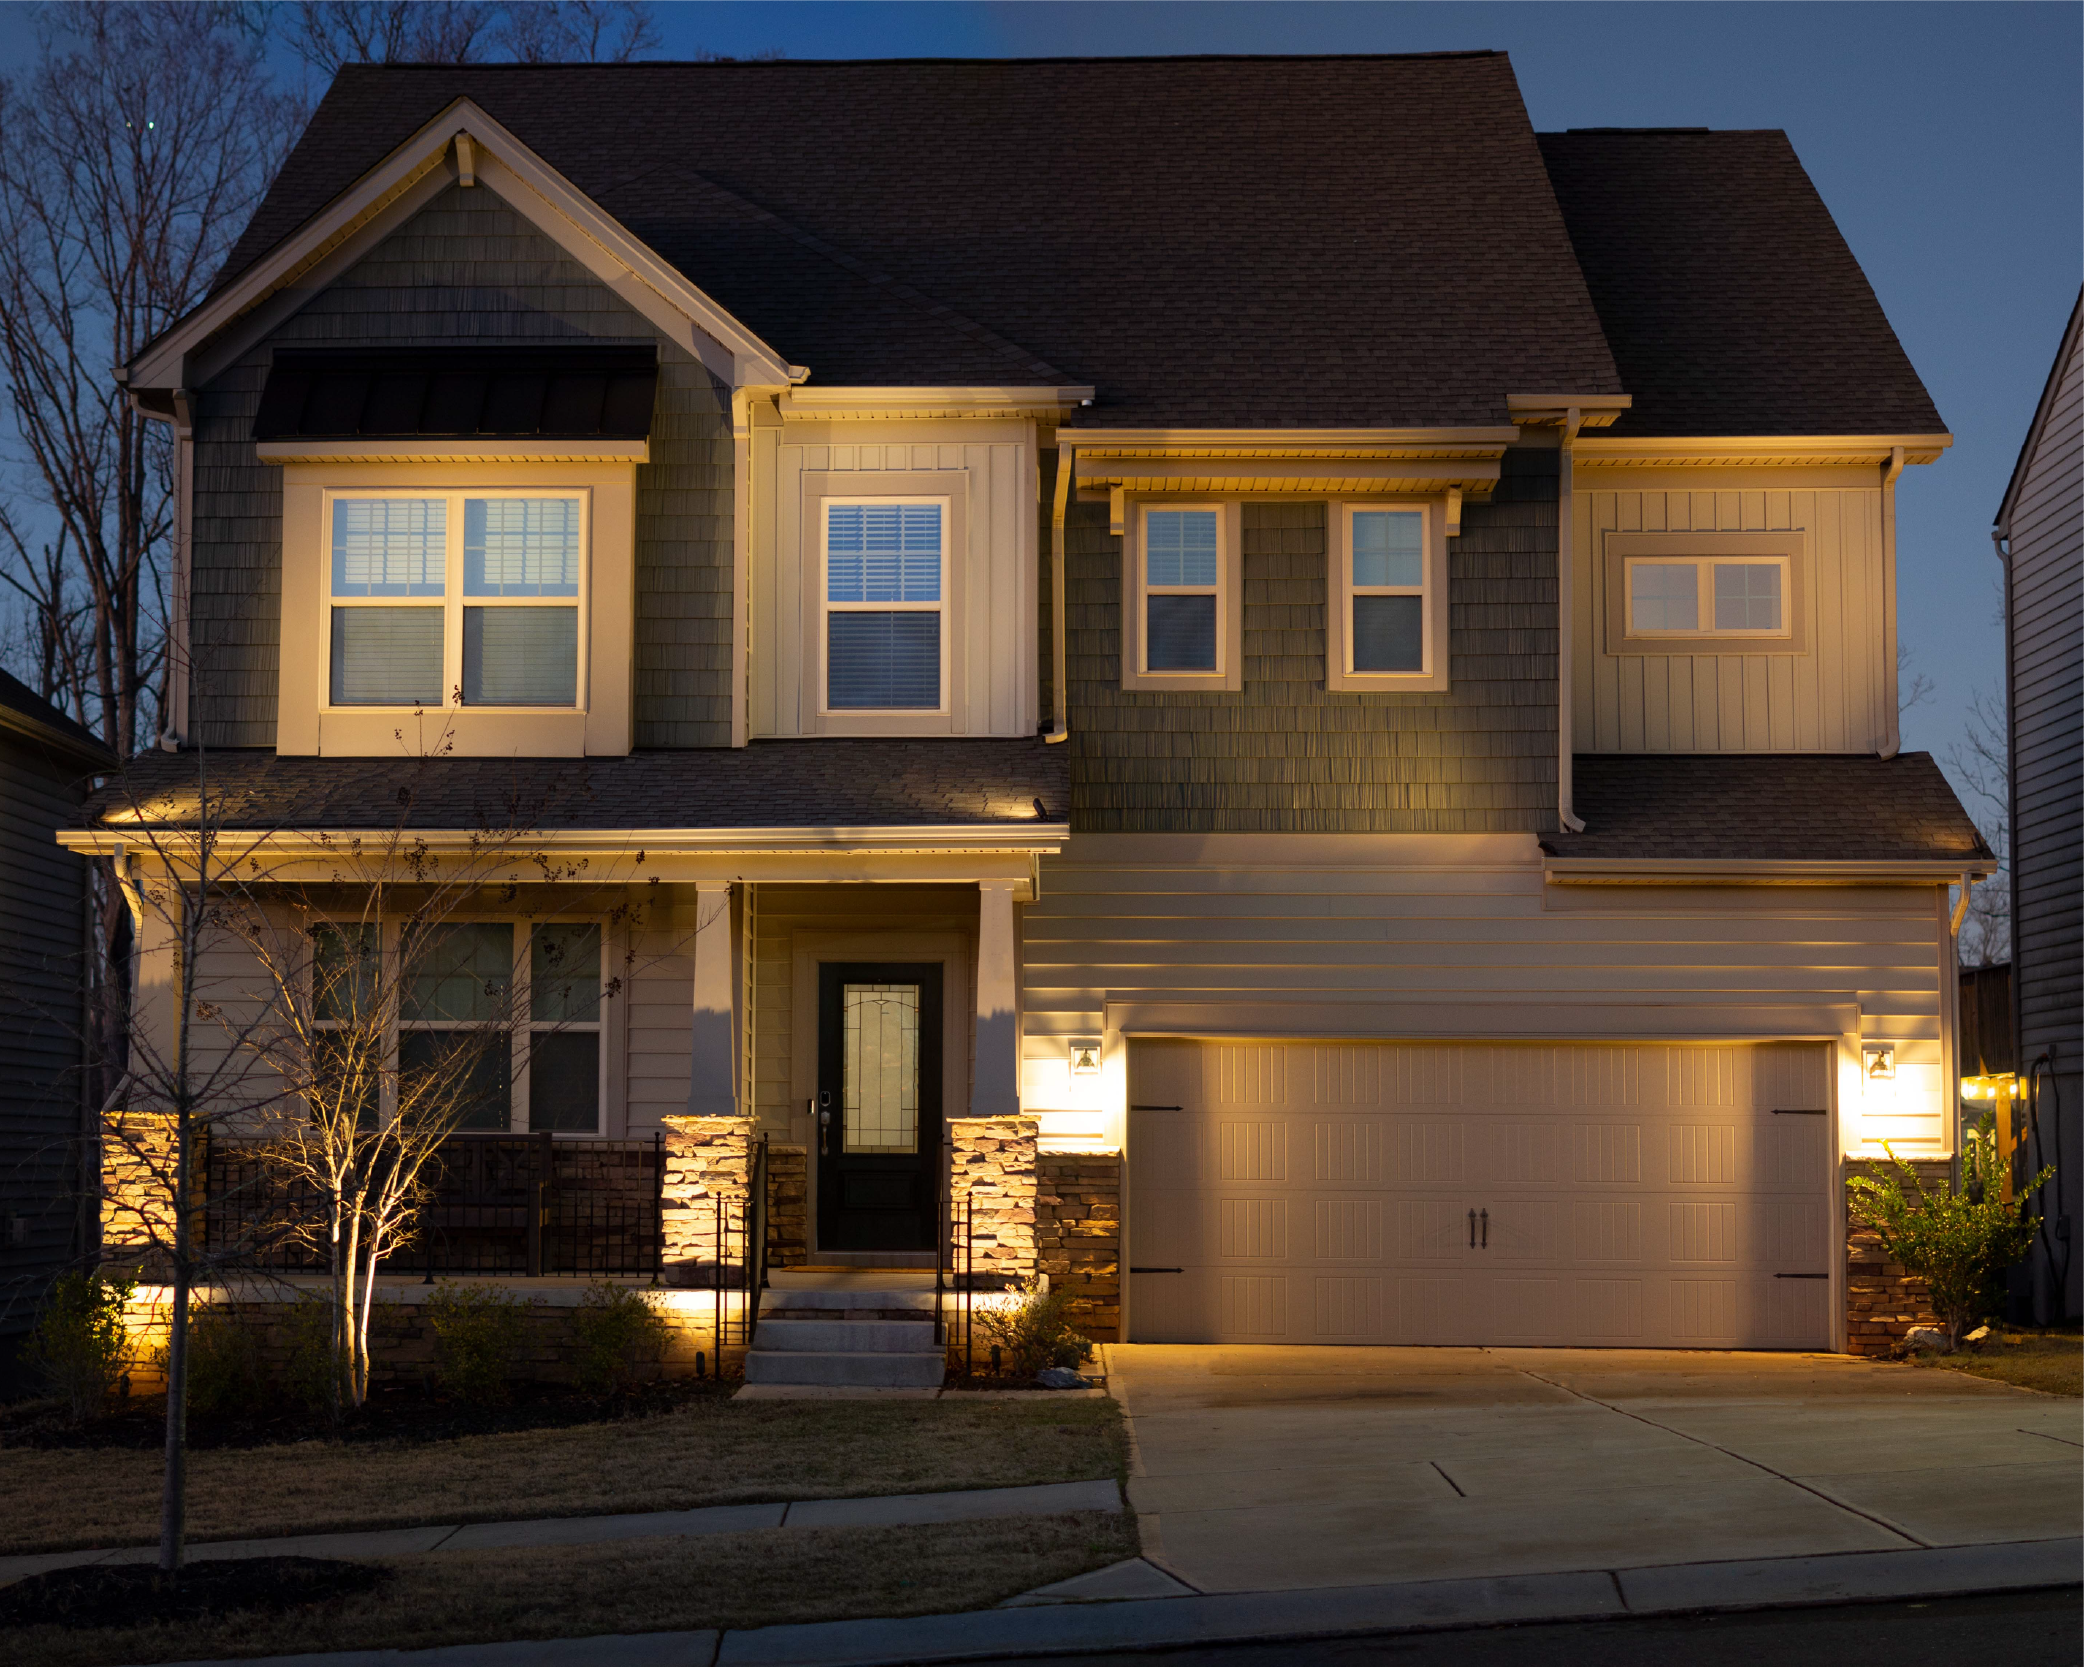  Green and tan craftsman style home illuminated with a combination of architectural up lights and landscape lighting. Small crepe myrtle with accent lights is positioned in front of the home. 